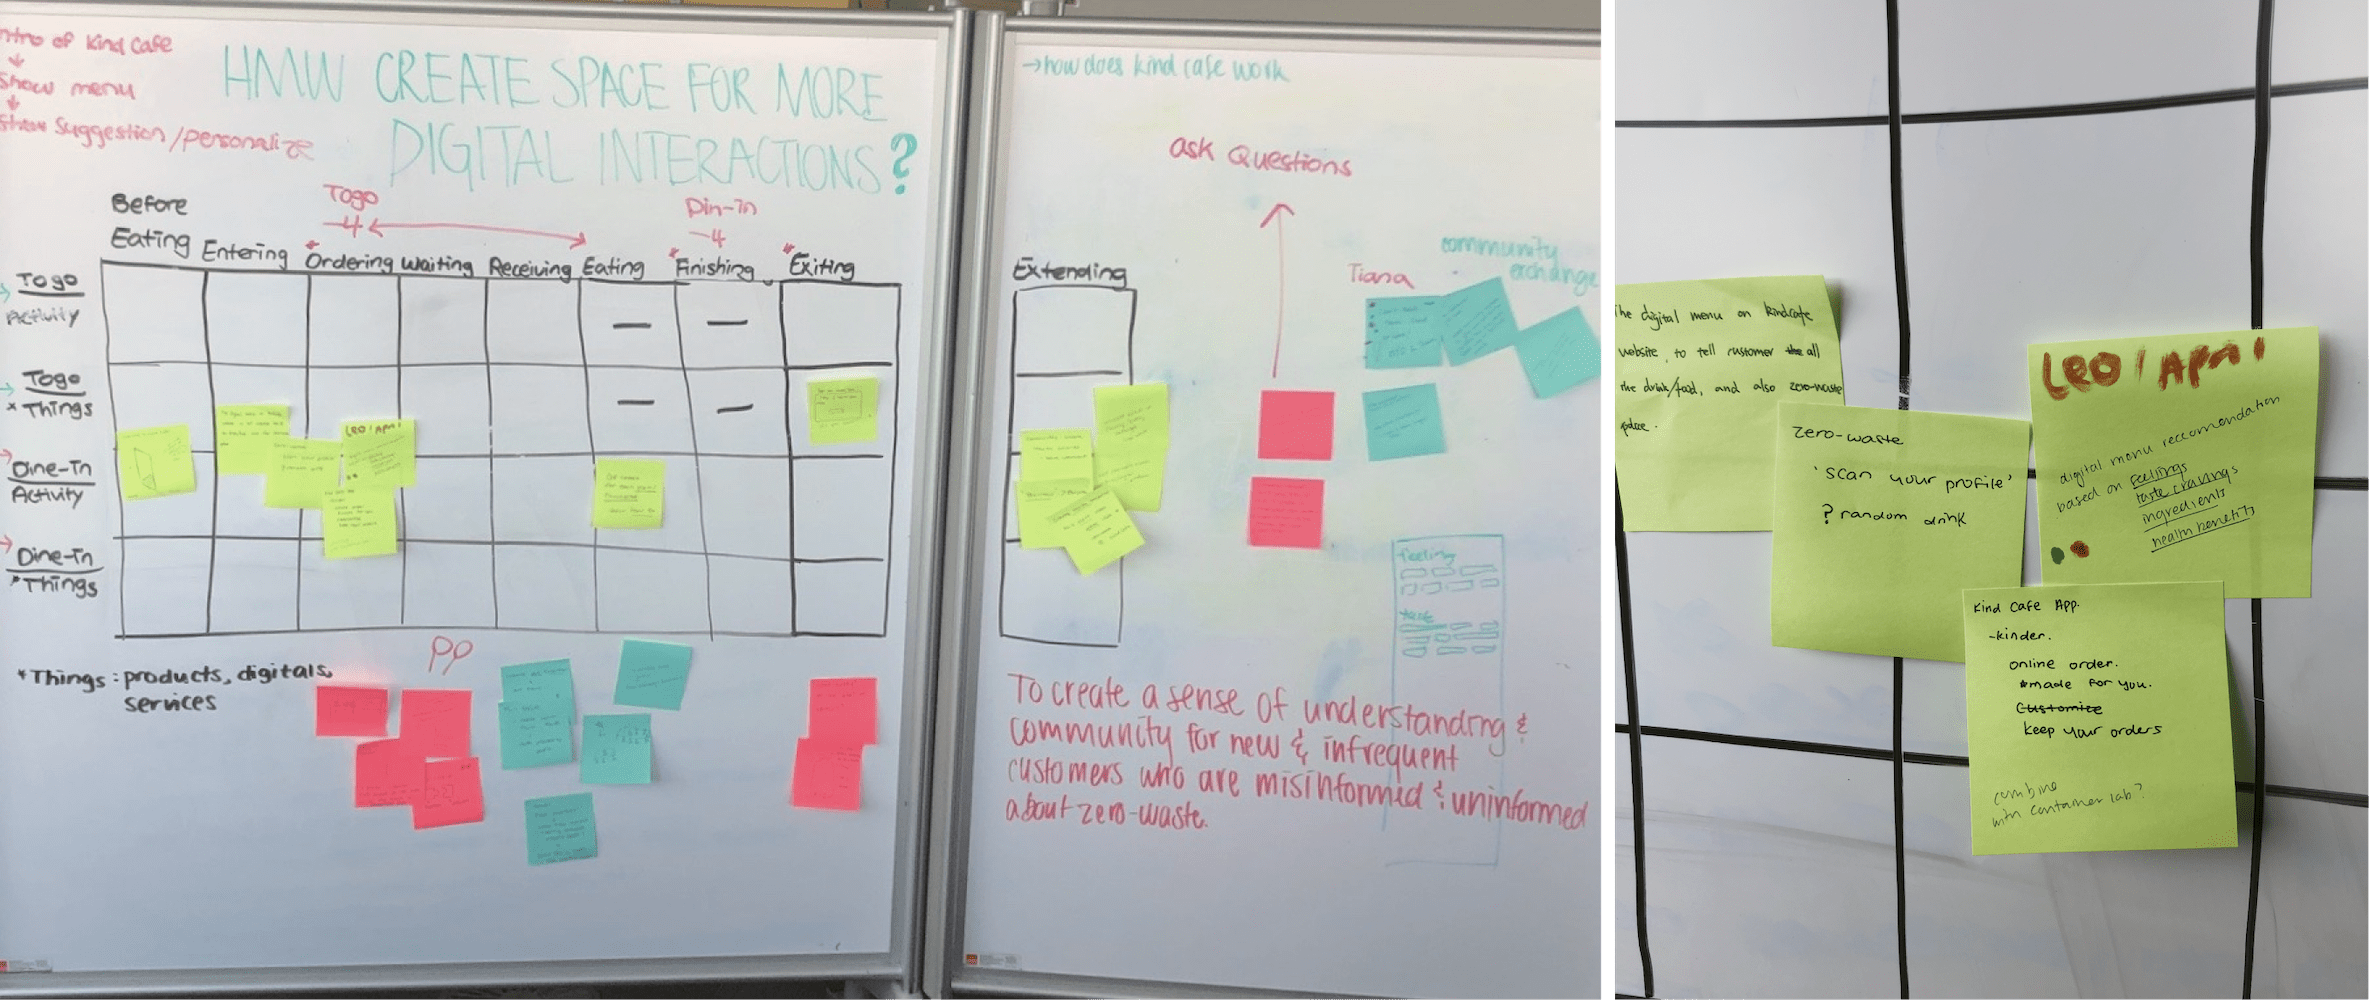 Whiteboard and sticky notes from our design sprint